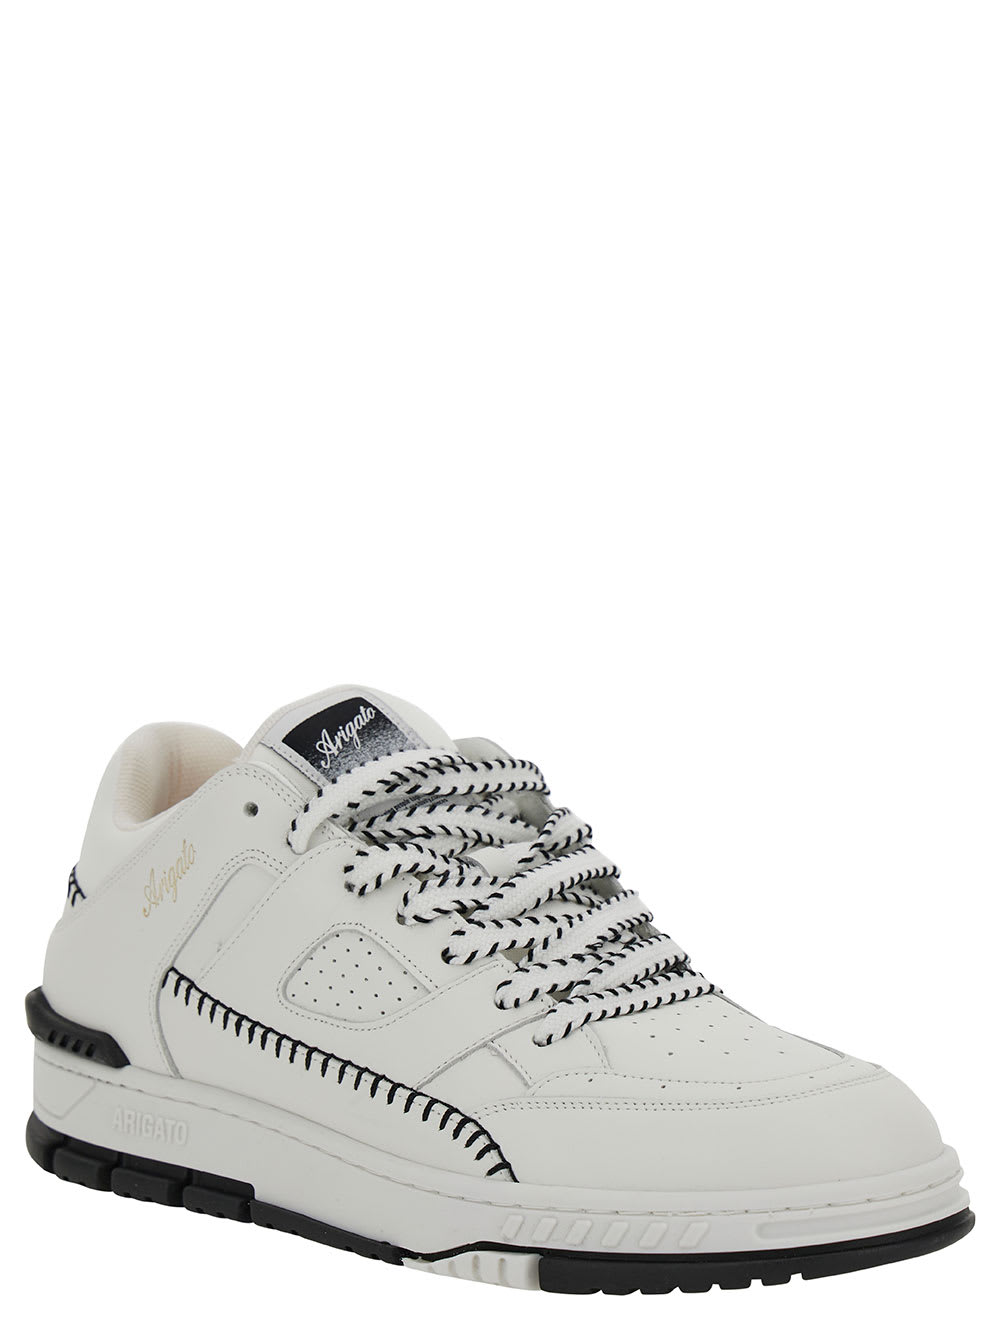 Shop Axel Arigato Area Lo Sneaker Stitch White Low Top Sneakers With Contrasting Stitch Detail In Leather Man